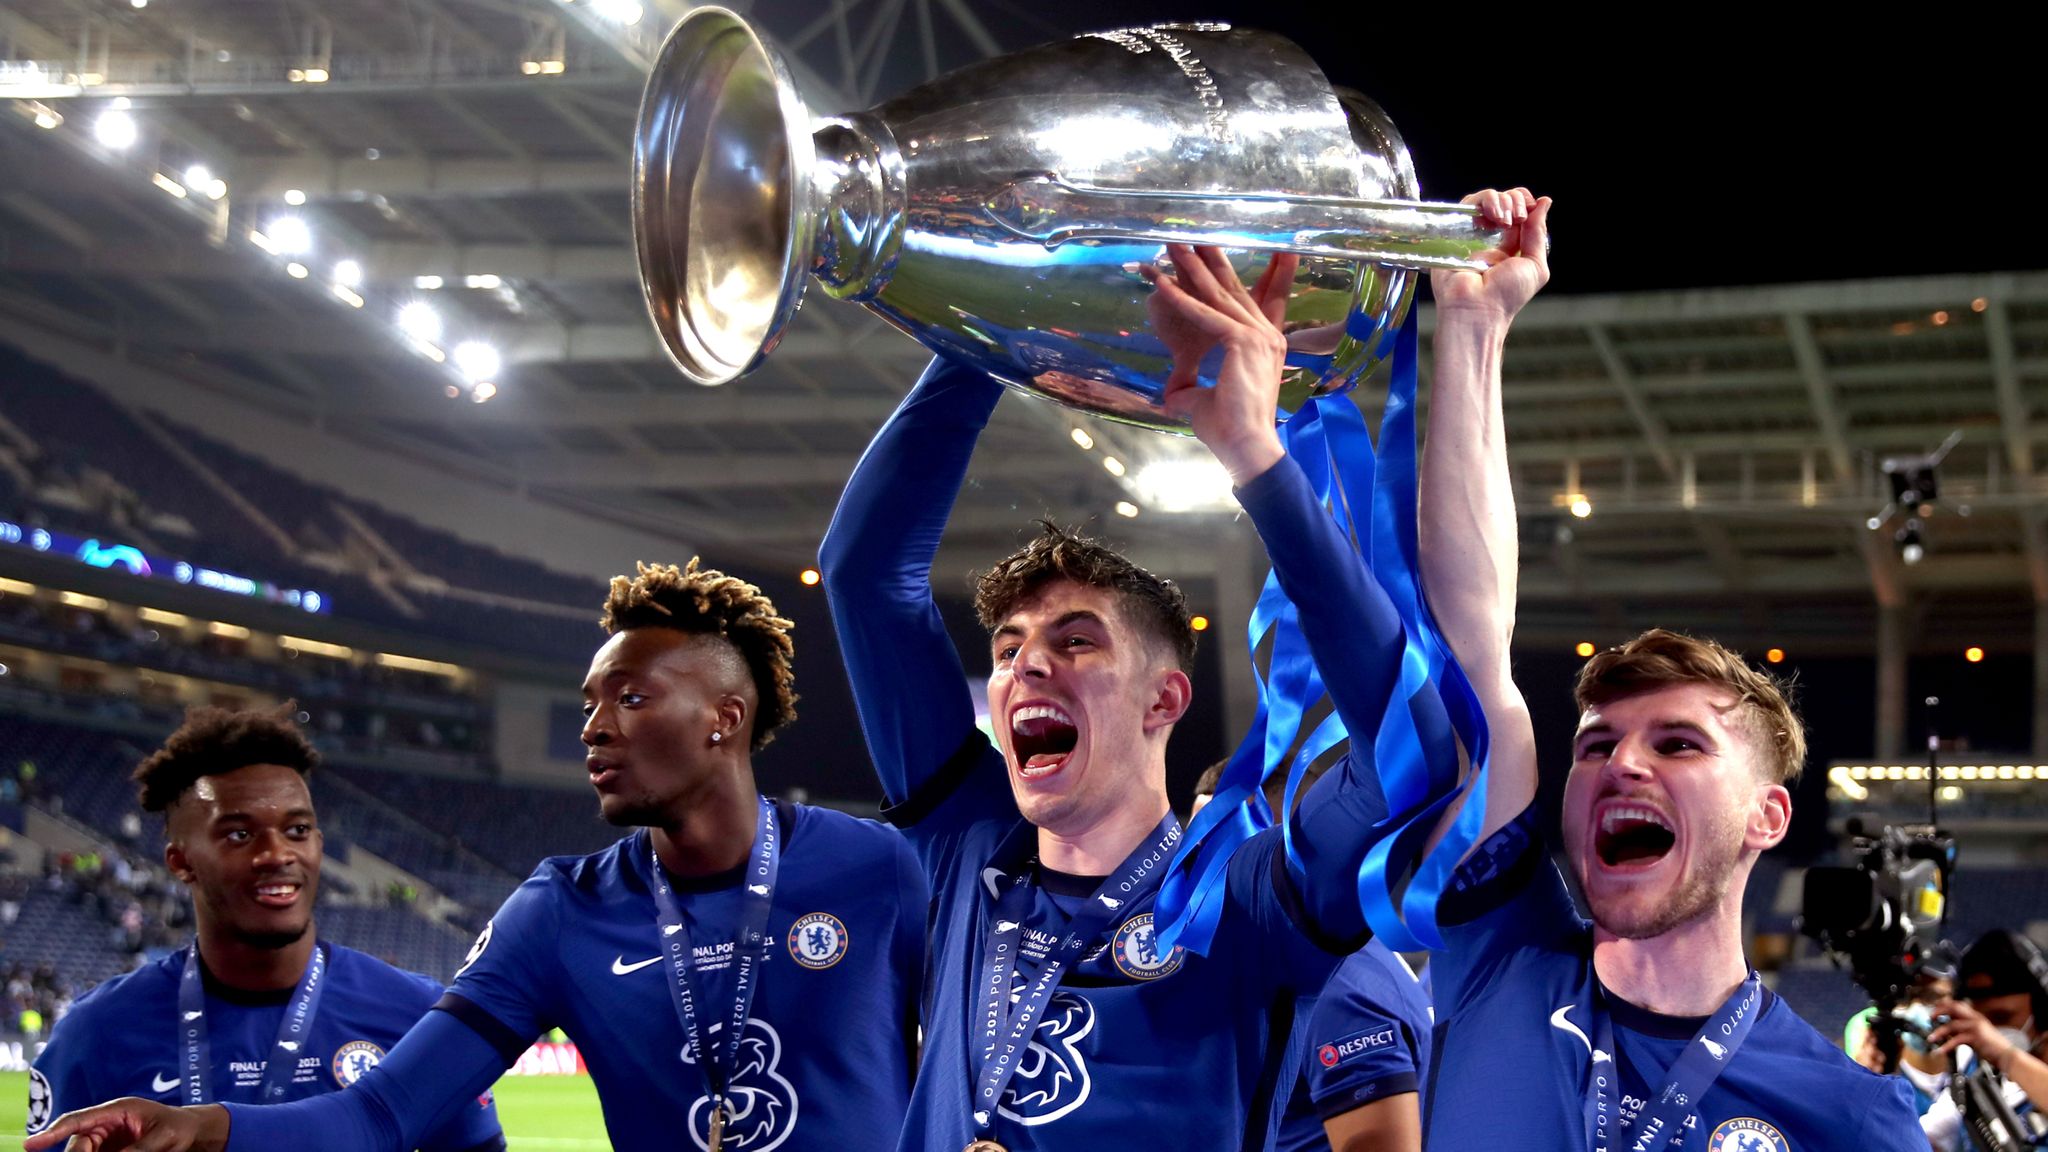 Chelsea beat Manchester City to win the Champions League in 2020/21 